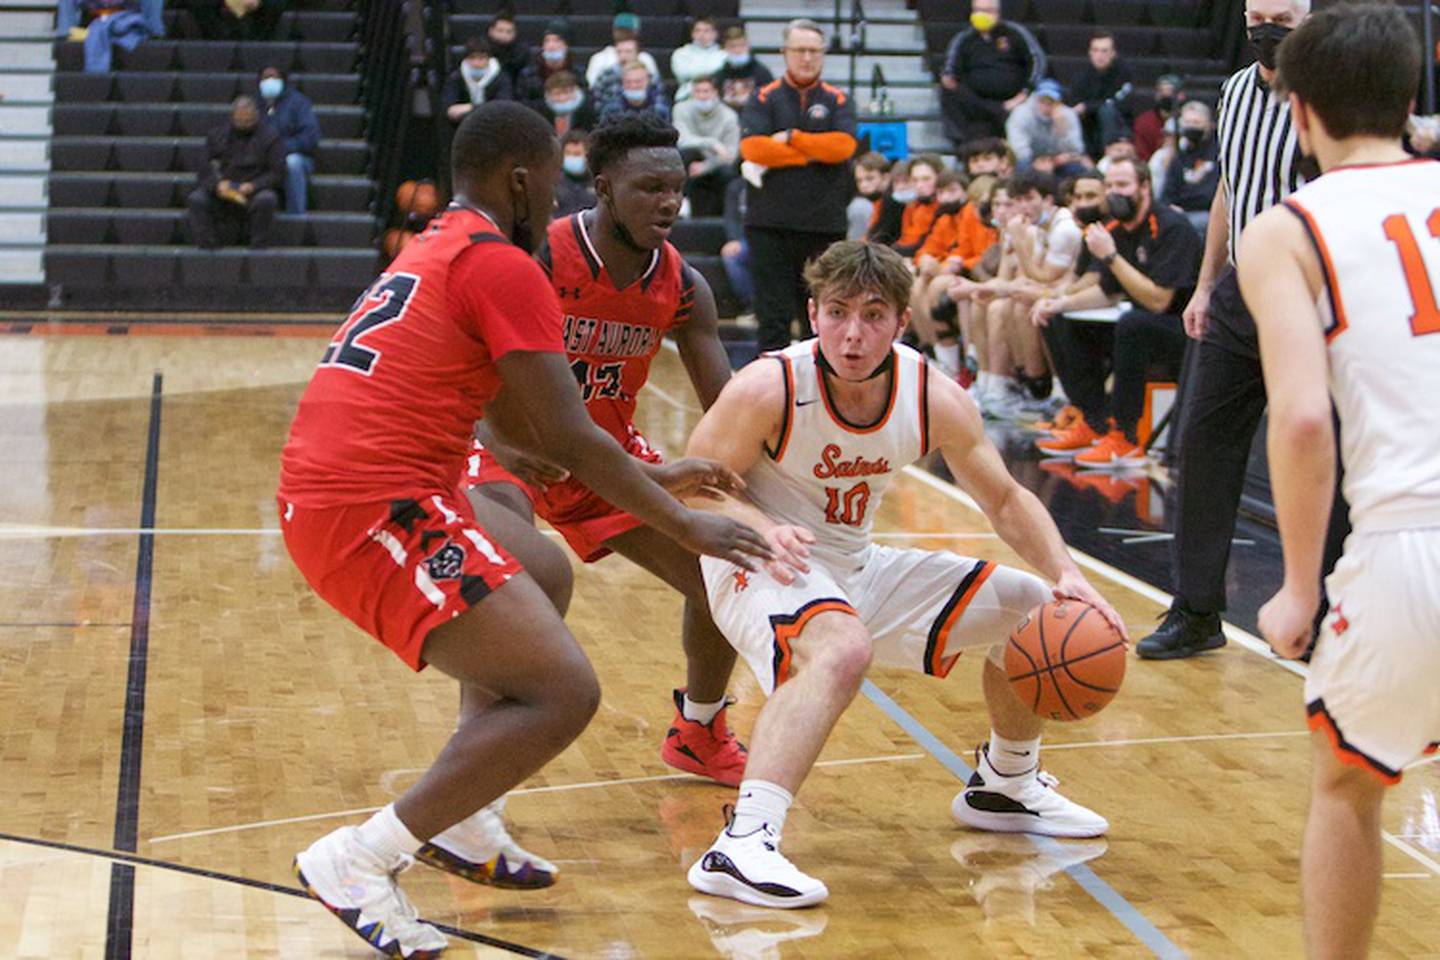 St. Charles East's AJ Gaca is pressured by defense by East Aurora's Enrique Perez JR. (10) and Stephen Dorsey (22) at the 62ND Annual Ron Johnson Thanksgiving Tournament on Nov.22, 2021 in St. Charles.